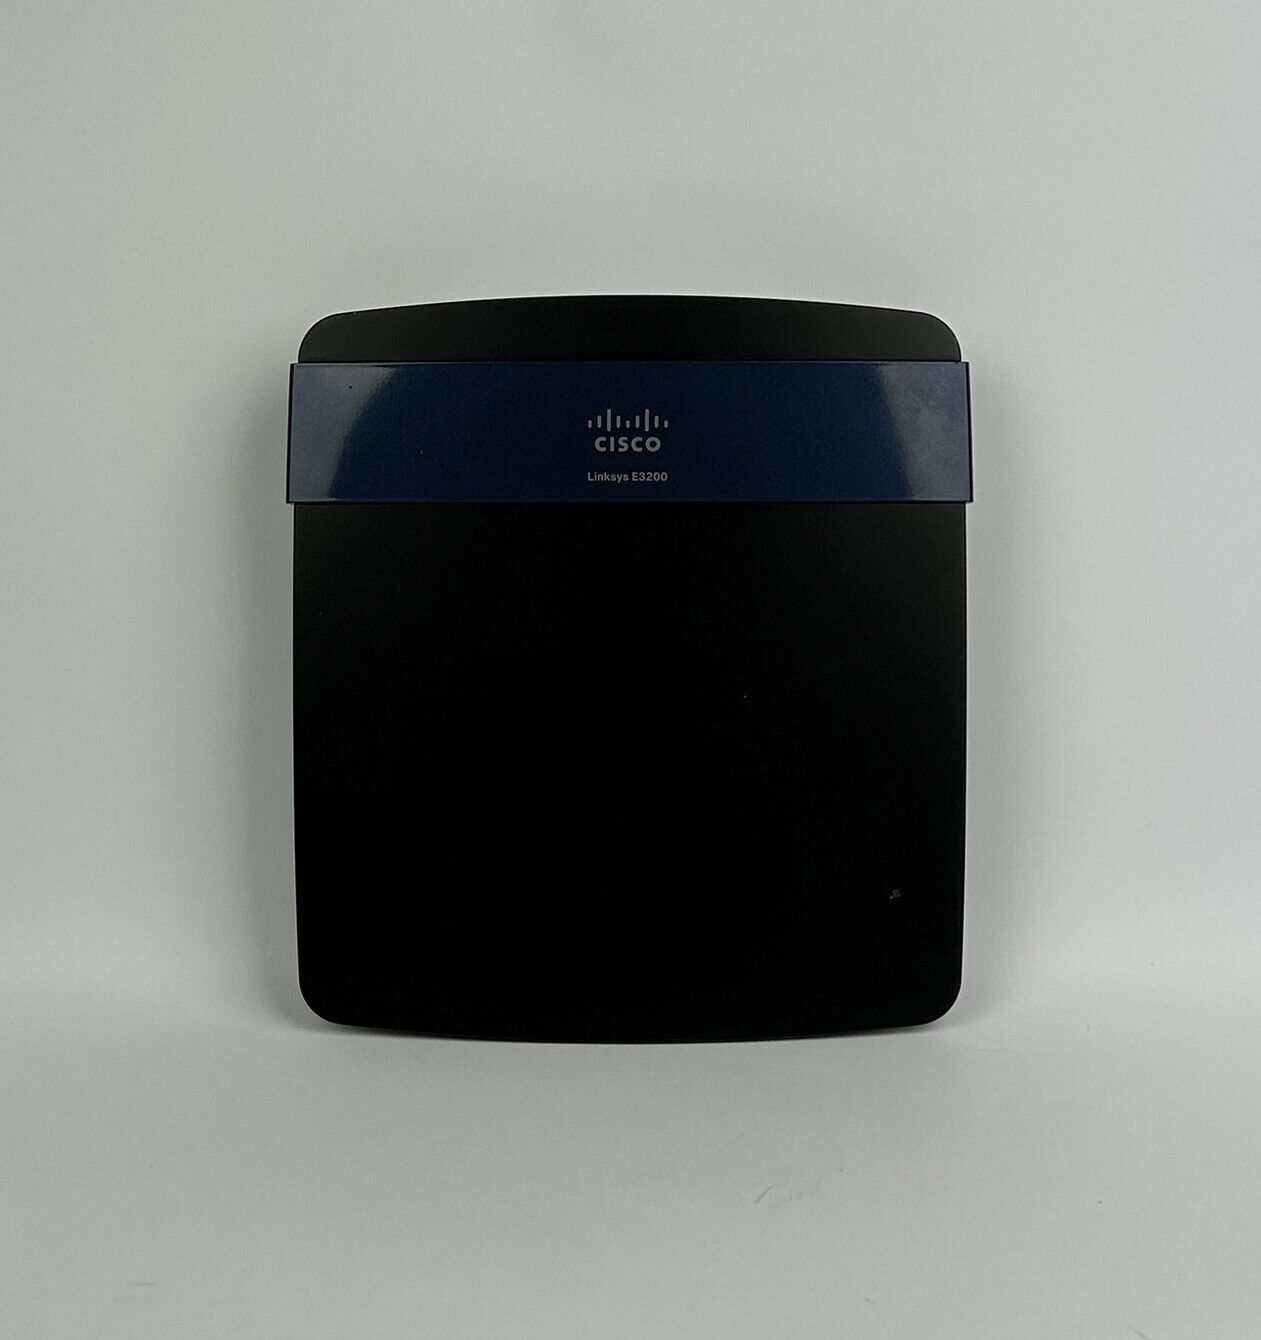 Cisco Linksys E3200 4-Port Gigabit Ethernet Dual-Band Wireless Router Networking